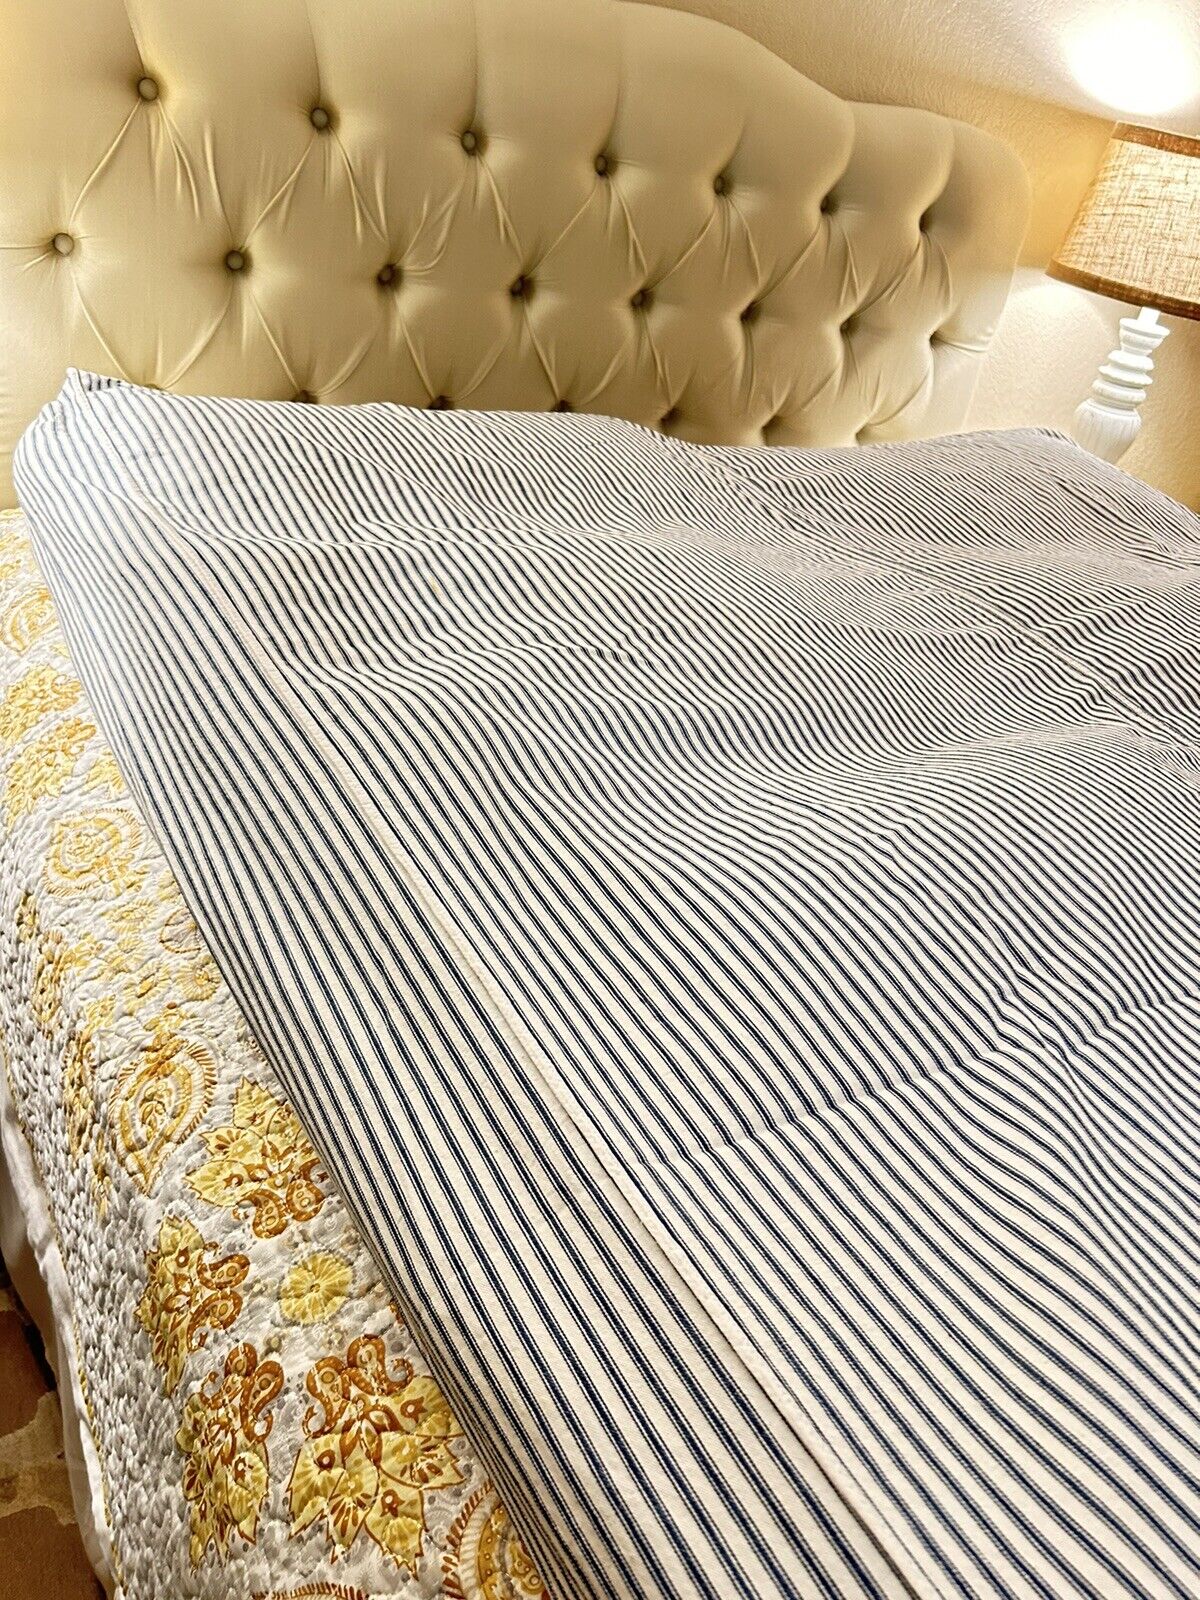 Rare Find Vintage Handmade Blue & White Ticking Feather Mattress COVER 54x78